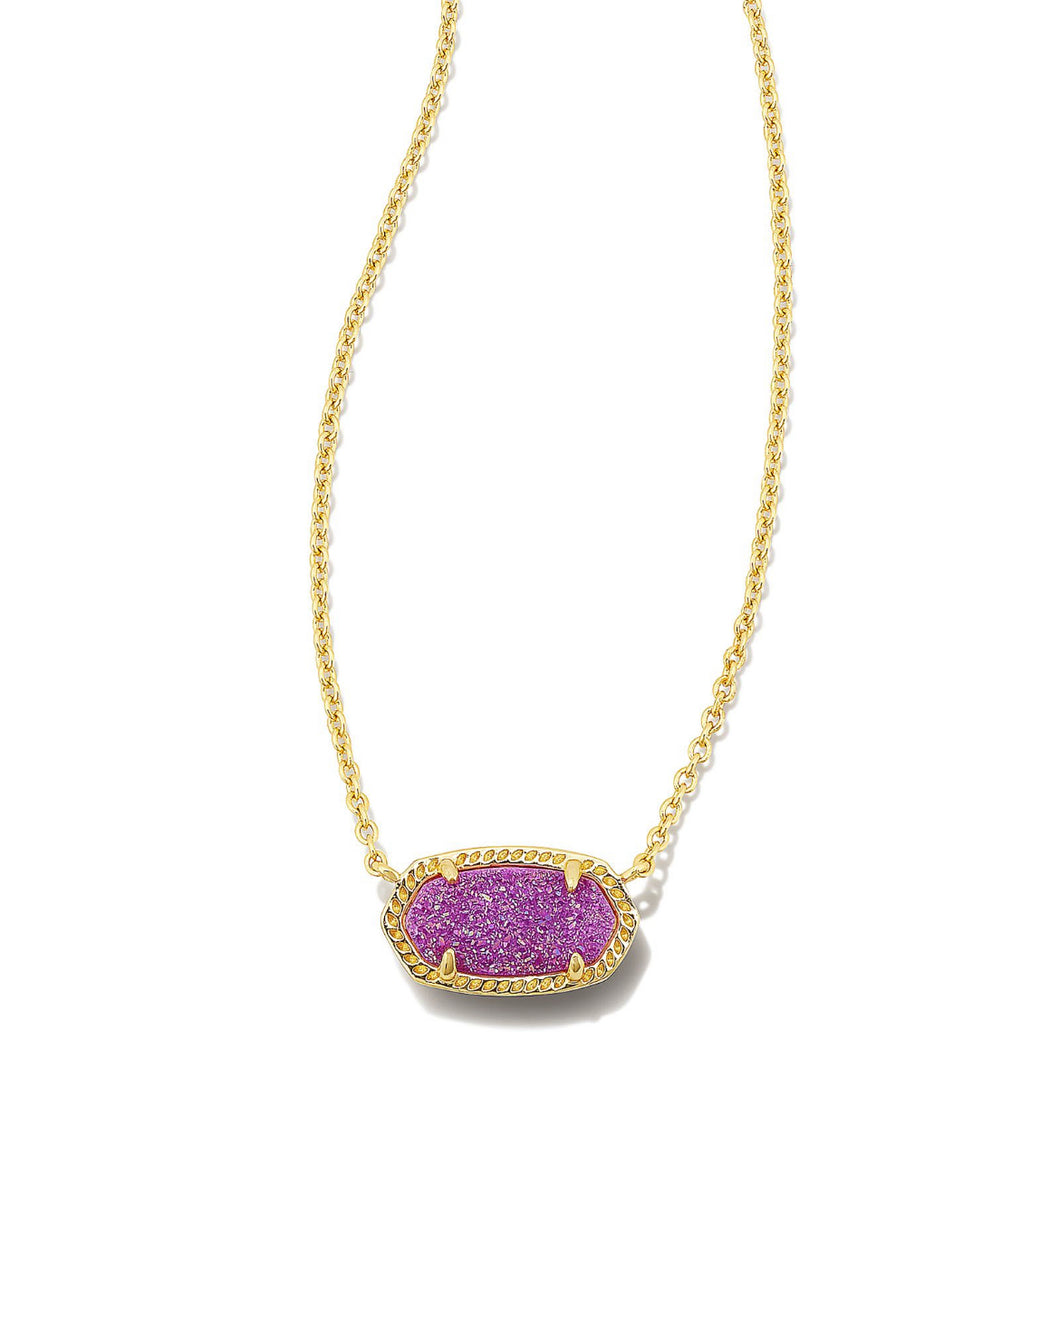 Kendra Scott: Elisa Gold Necklace in Mulberry Drusy